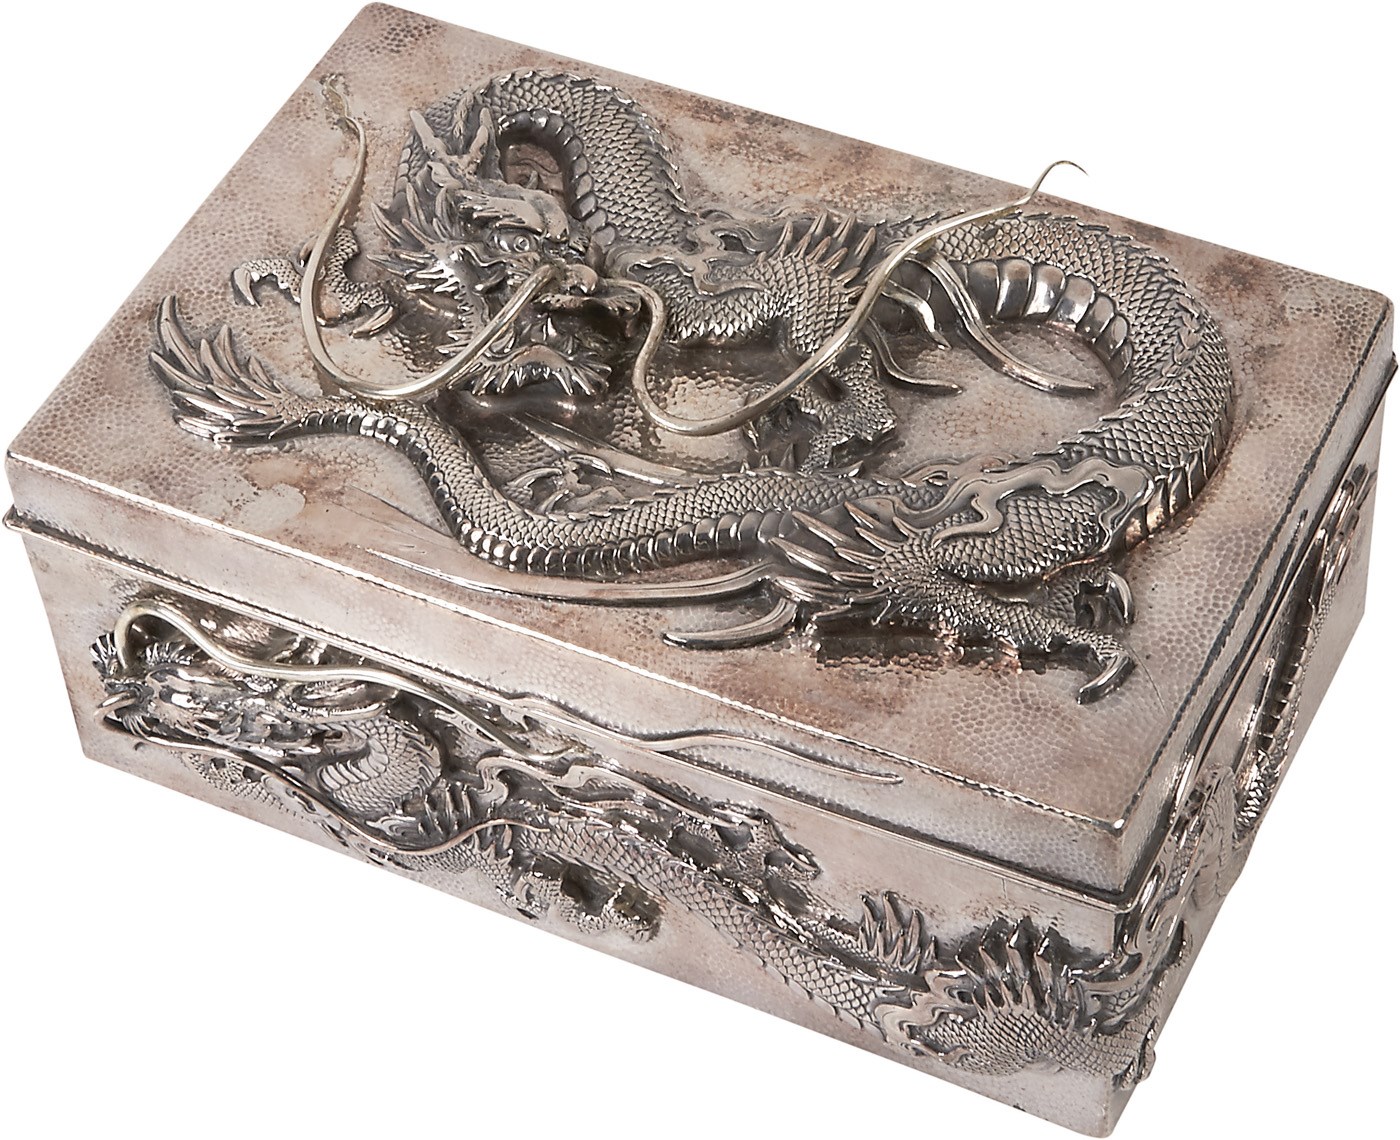 Horse Racing - Amazing "Flying Dragons" Japanese Silver Box - Awarded for the 1906 China Griffins 3/4 Mile